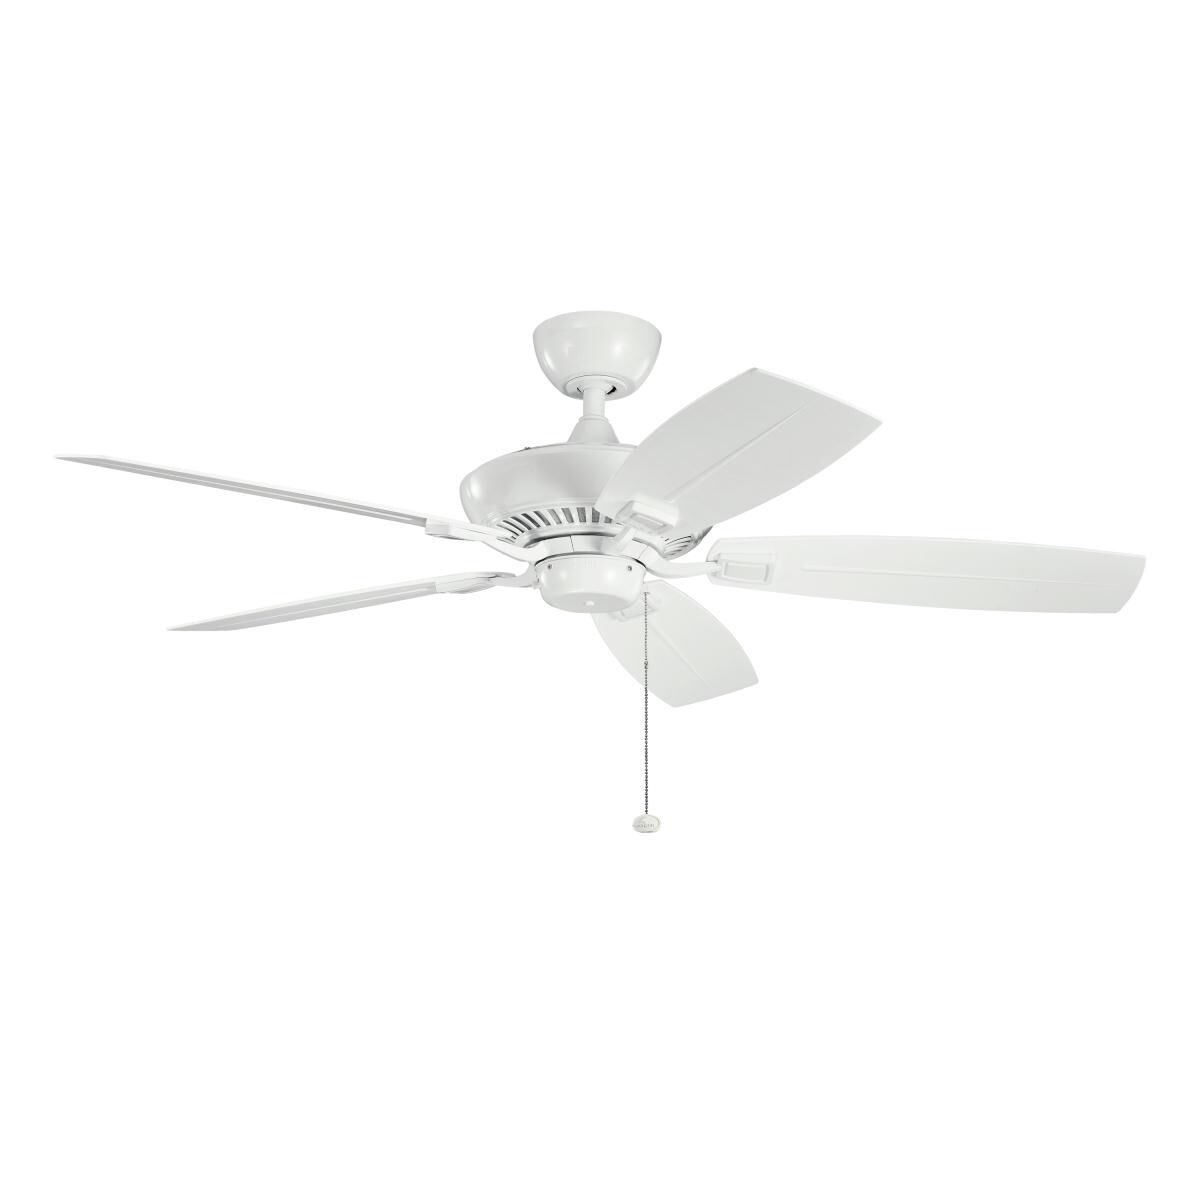 Photos - Fan Kichler Lighting Canfield Outdoor Rated 52 Inch Ceiling  Canfield - 310 